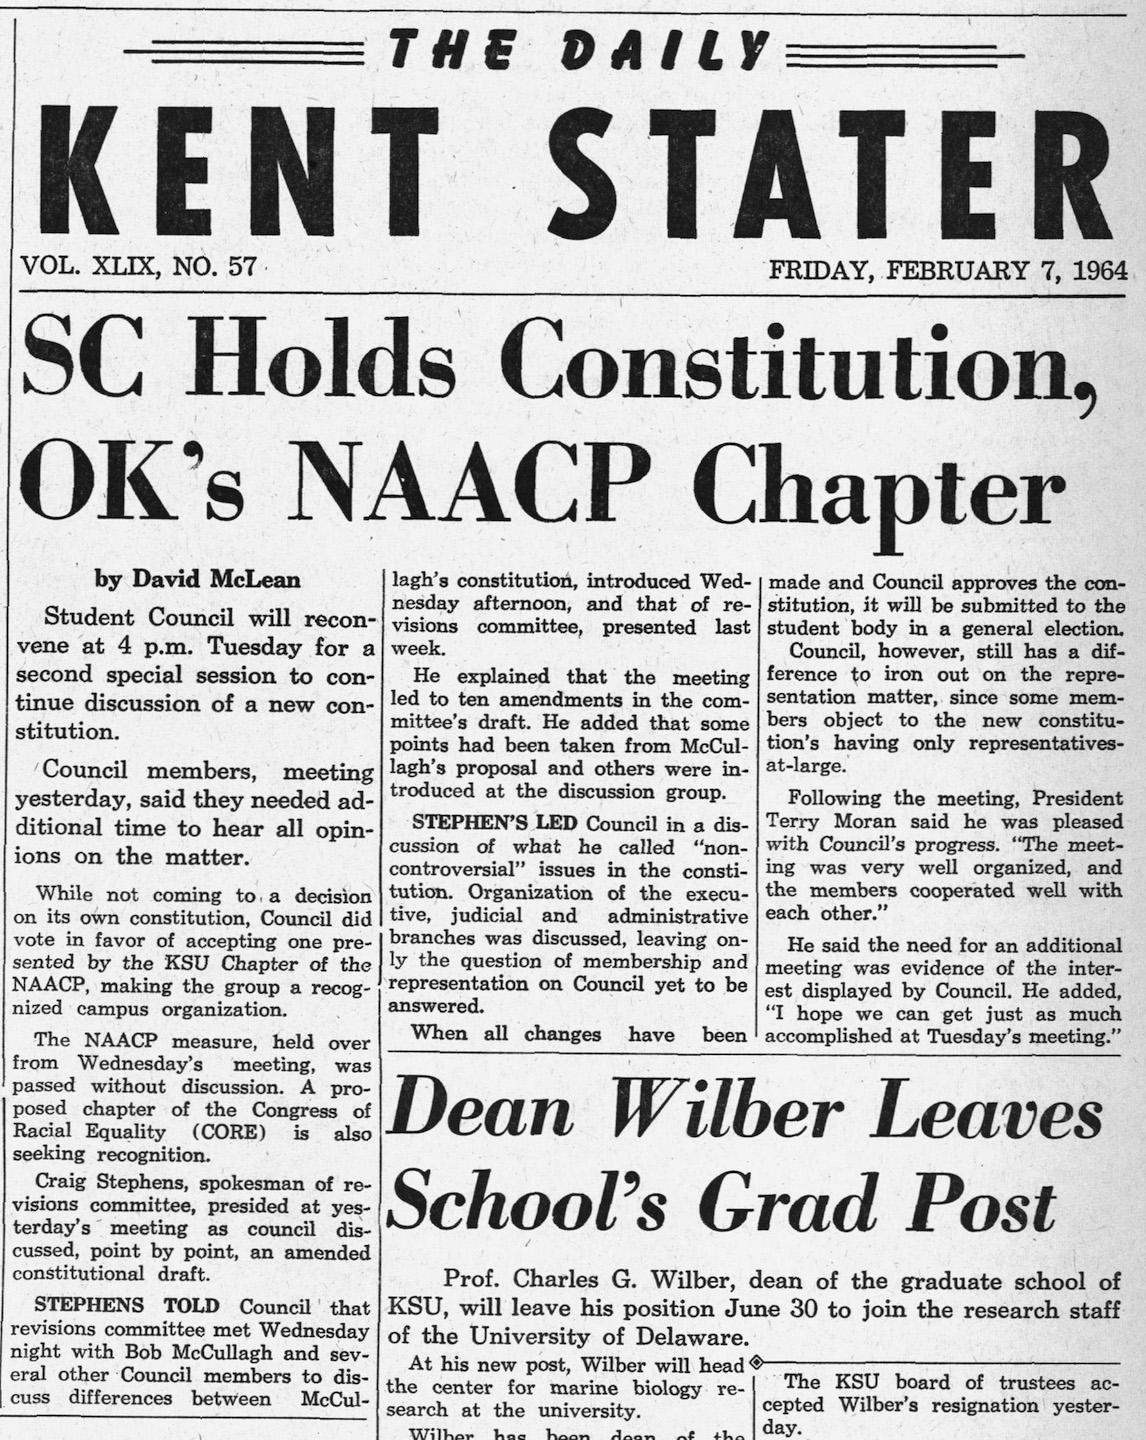 Daily Kent Stater, February 7, 1964, page 1.